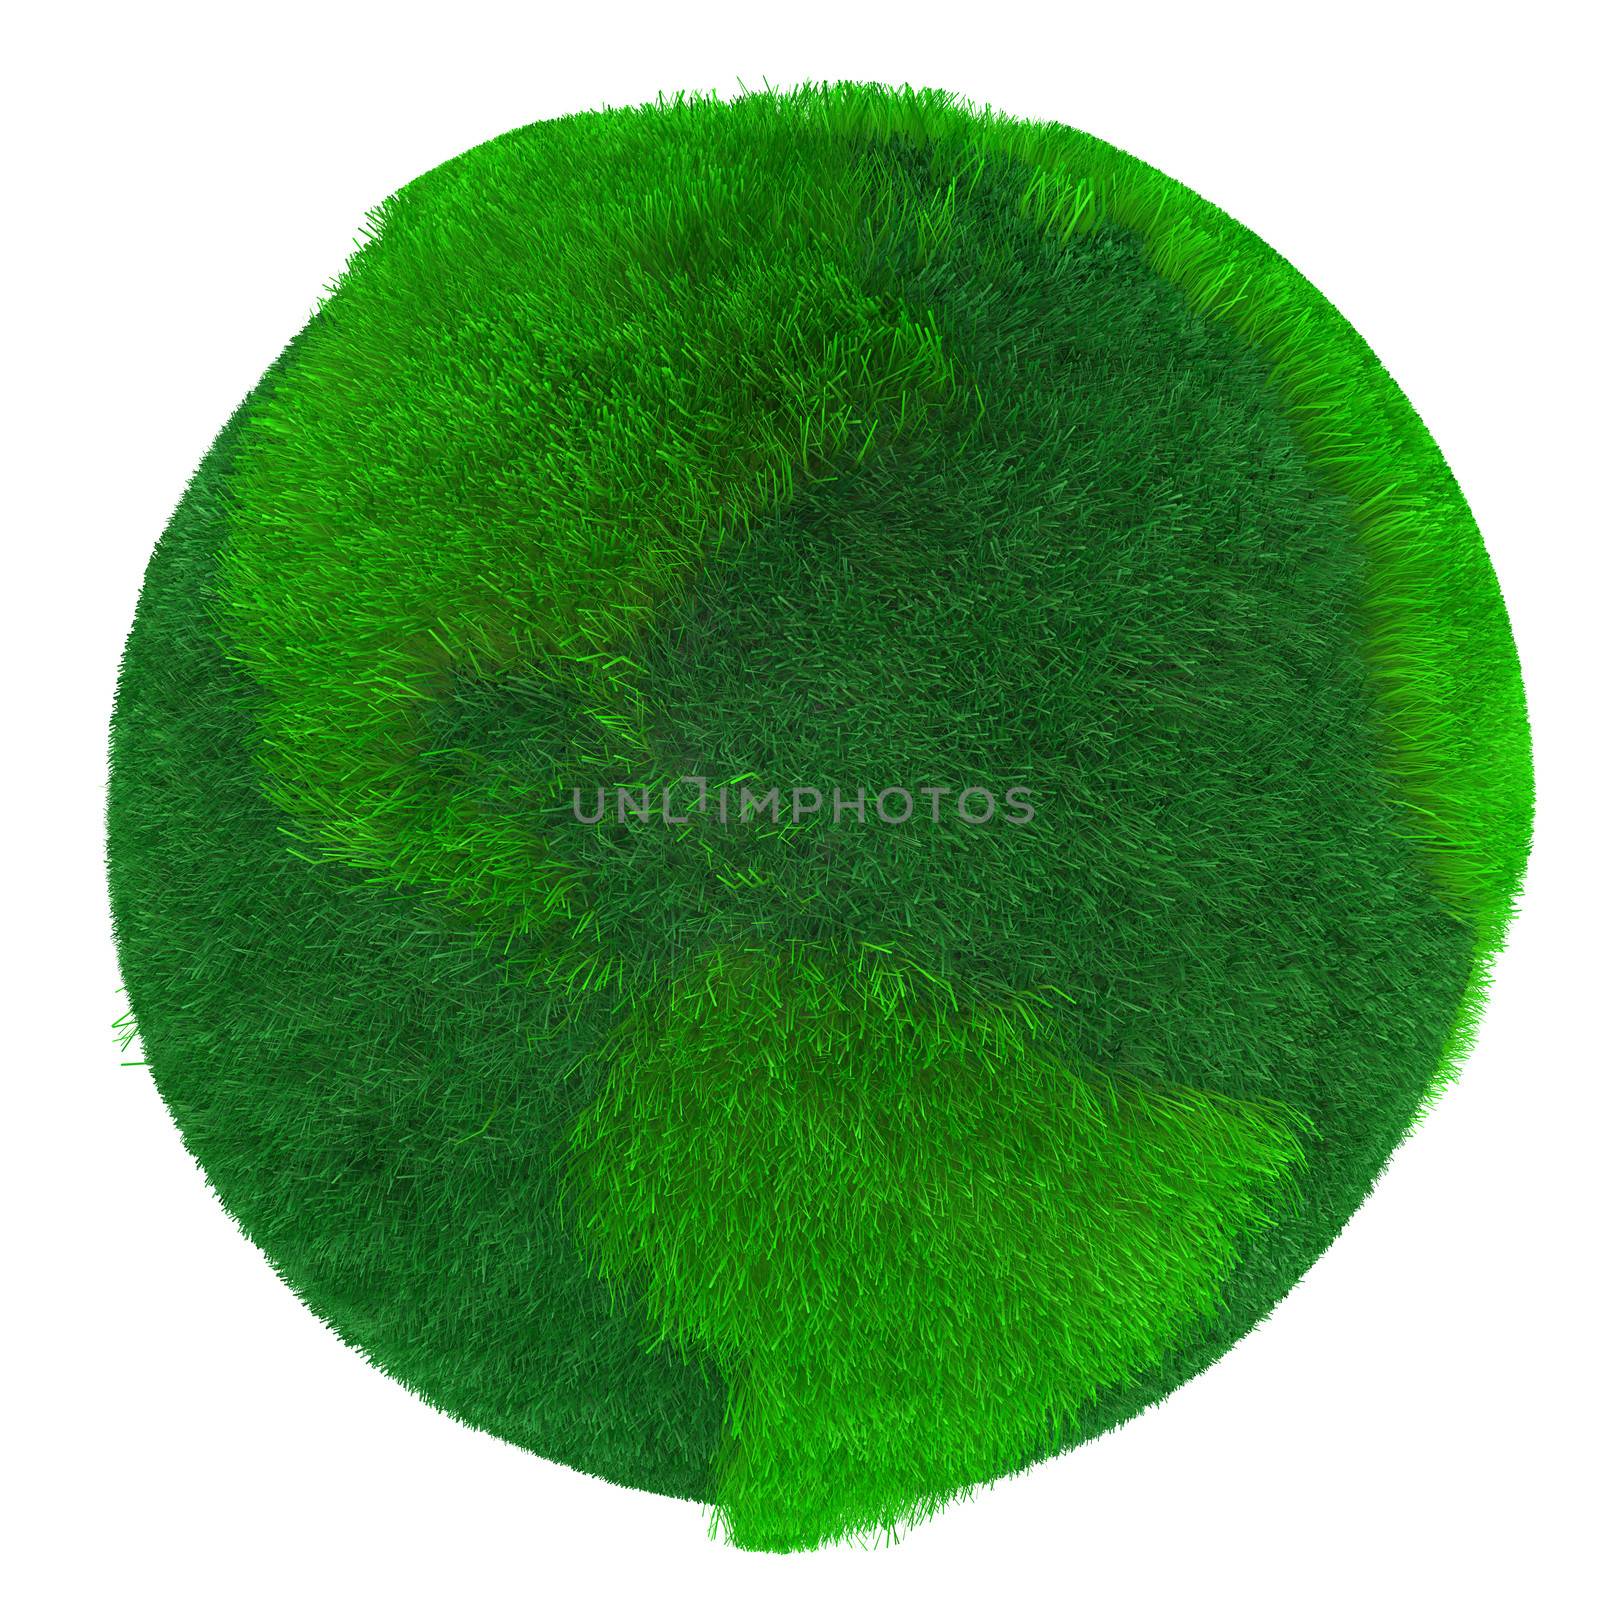 Green Earth, covered with grass. Digitally Generated Image.